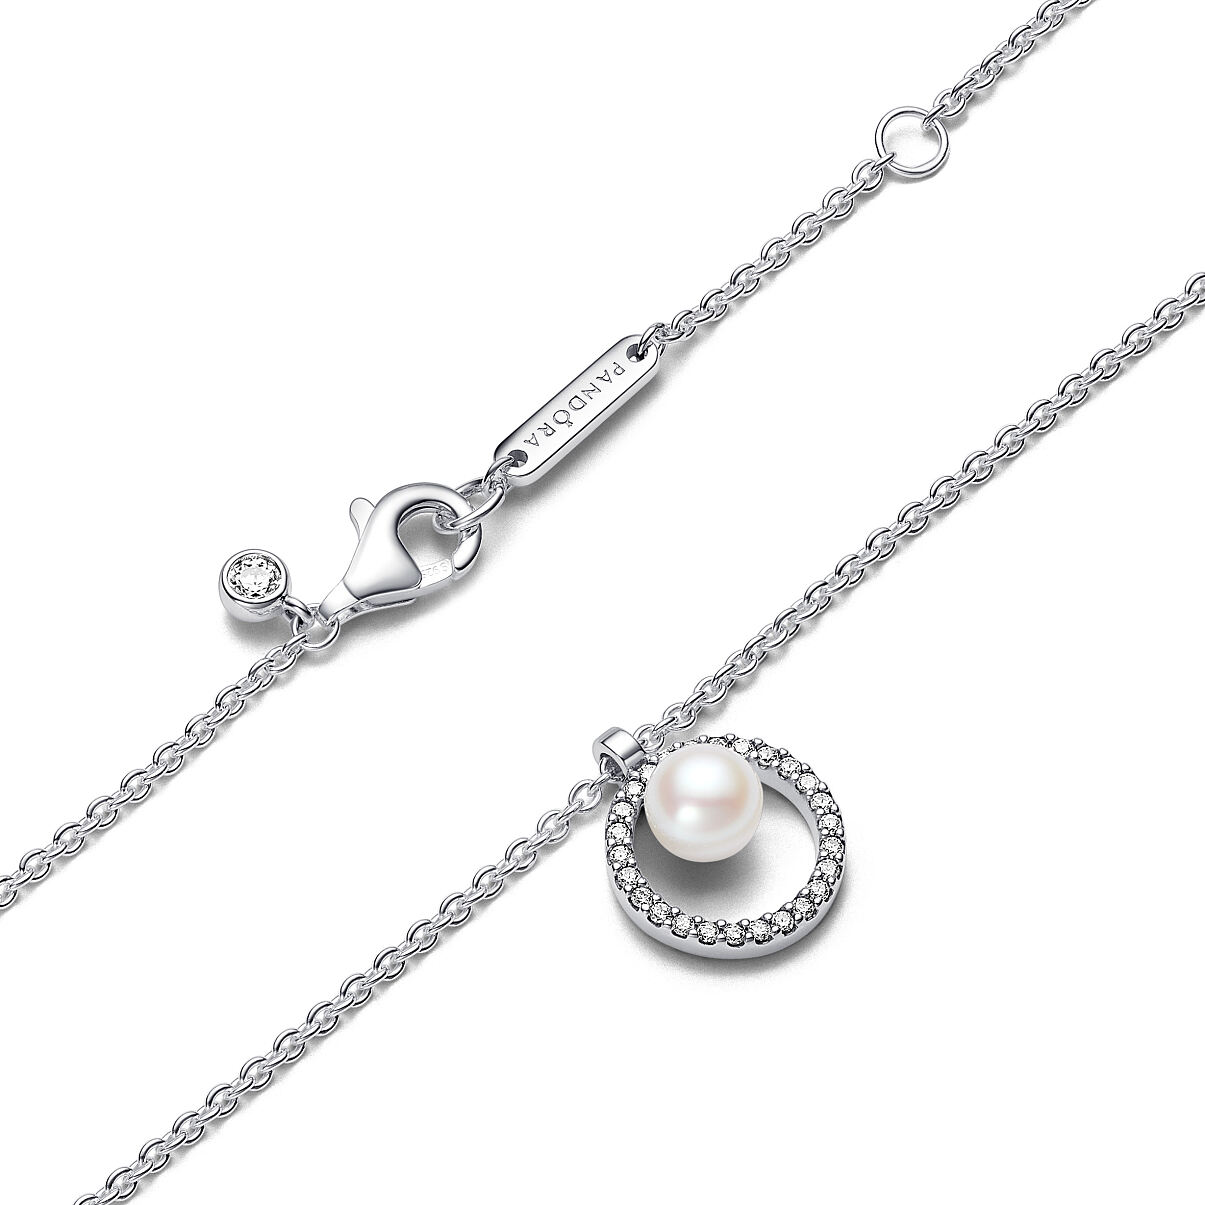 Pandora_Necklace_Sterling Silver_Freshwater Pearls_Cubic Zirconia_393165C01_99,00 Euro (4)